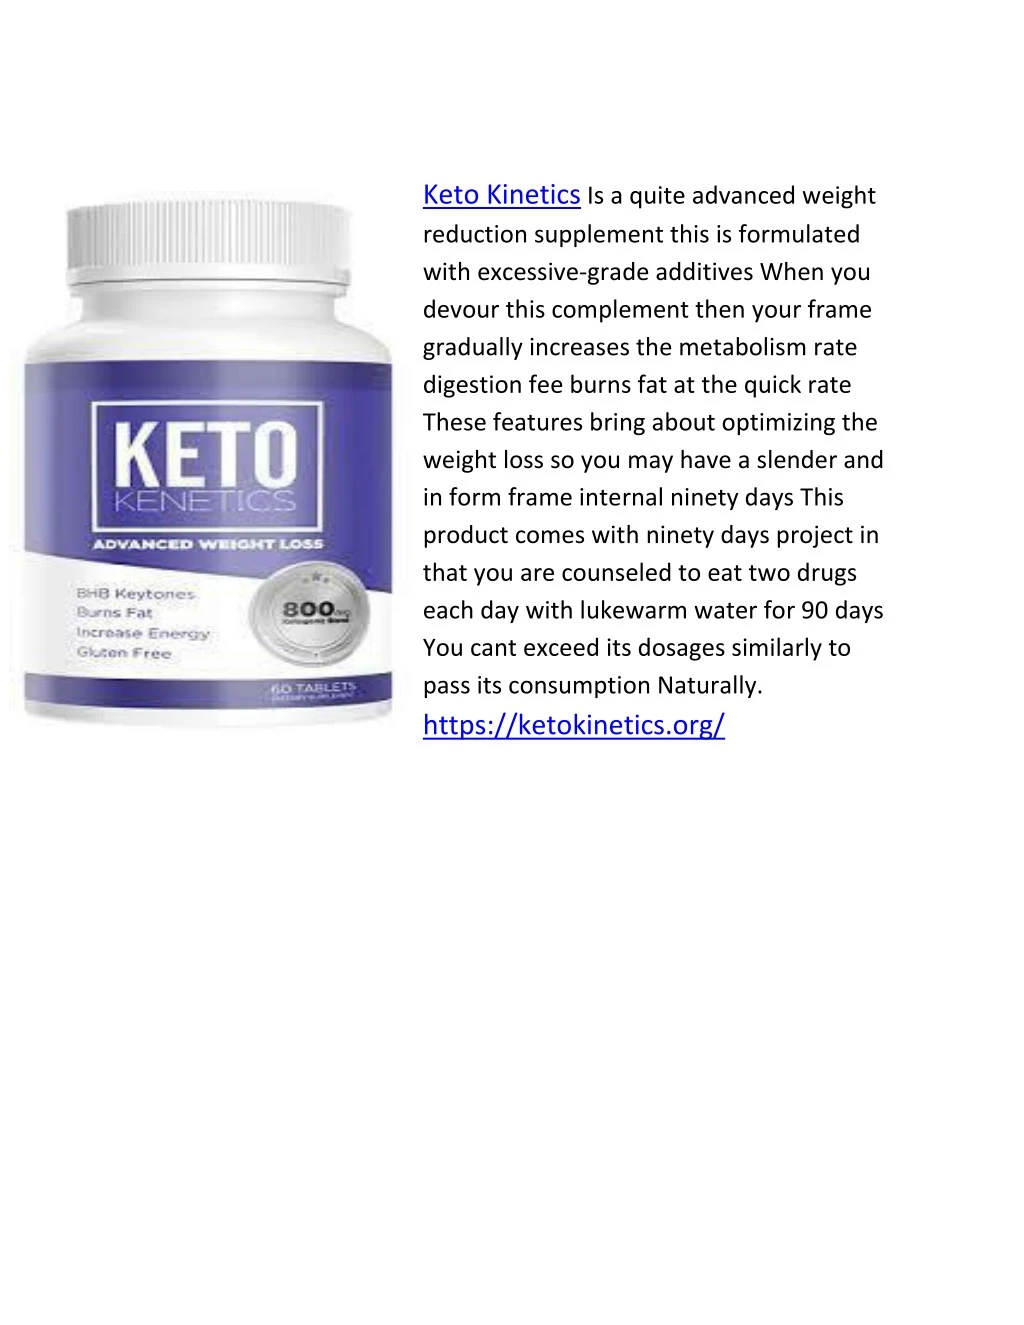 keto kinetics is a quite advanced weight